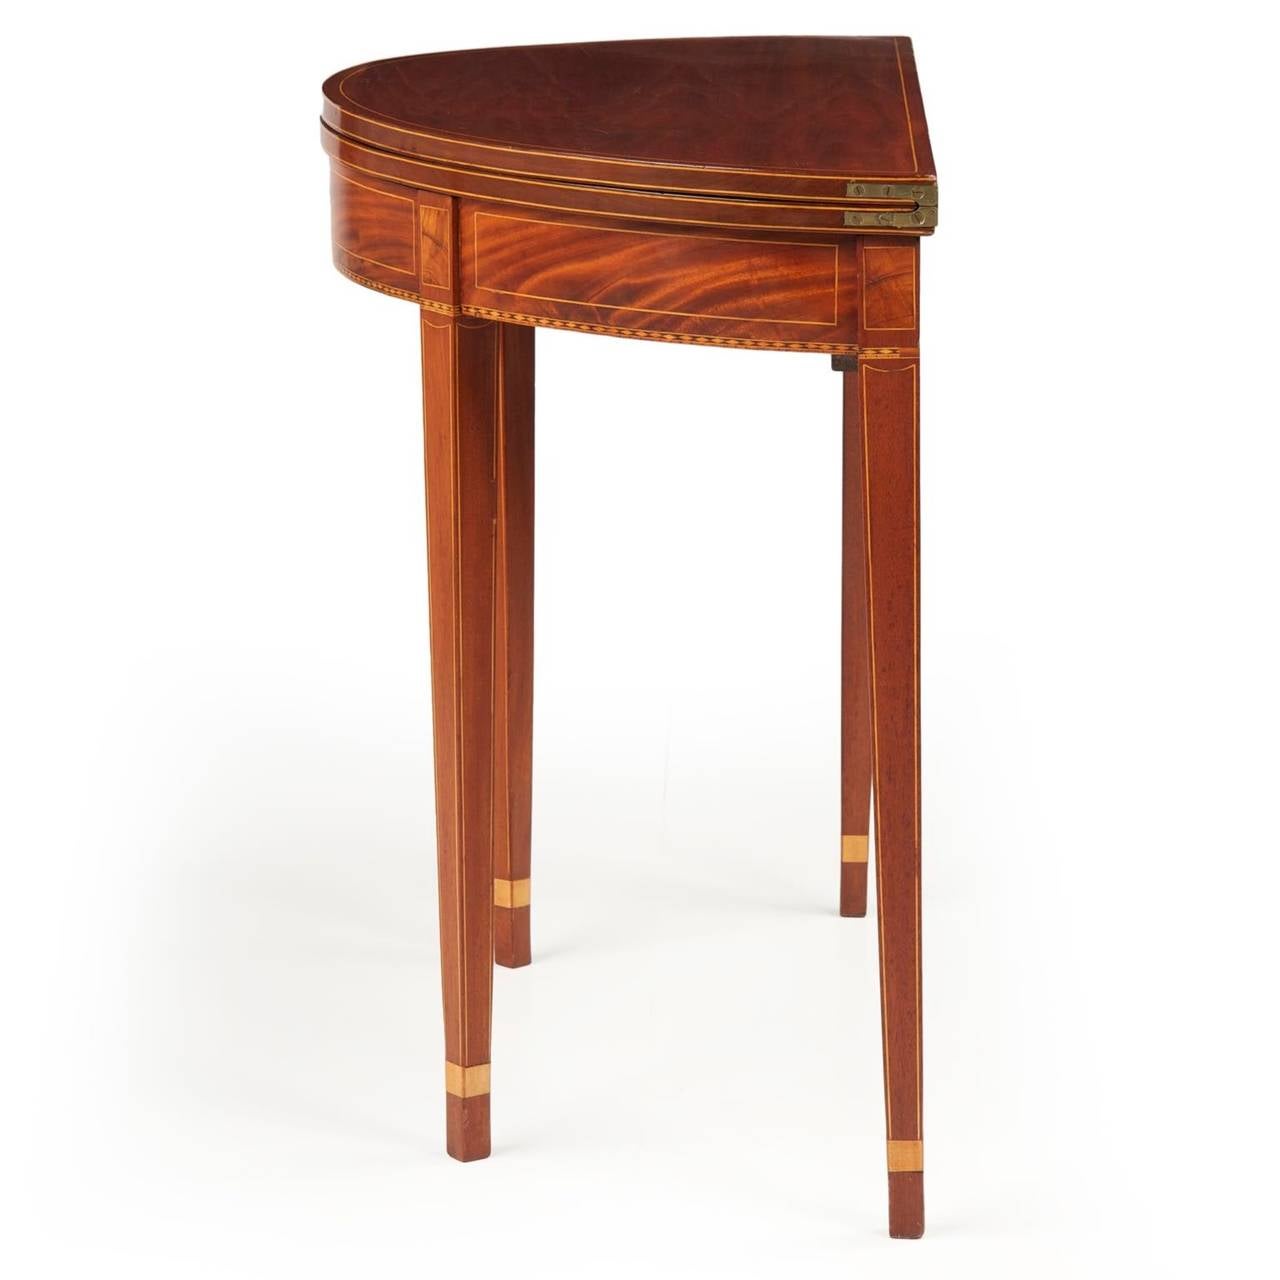 With wonderful ruby red color brilliant throughout the solid mahogany and mahogany veneers of the surface, this is a subtle table that is almost entirely free of embellishment other than the angular stringer inlays along the edges and framing the